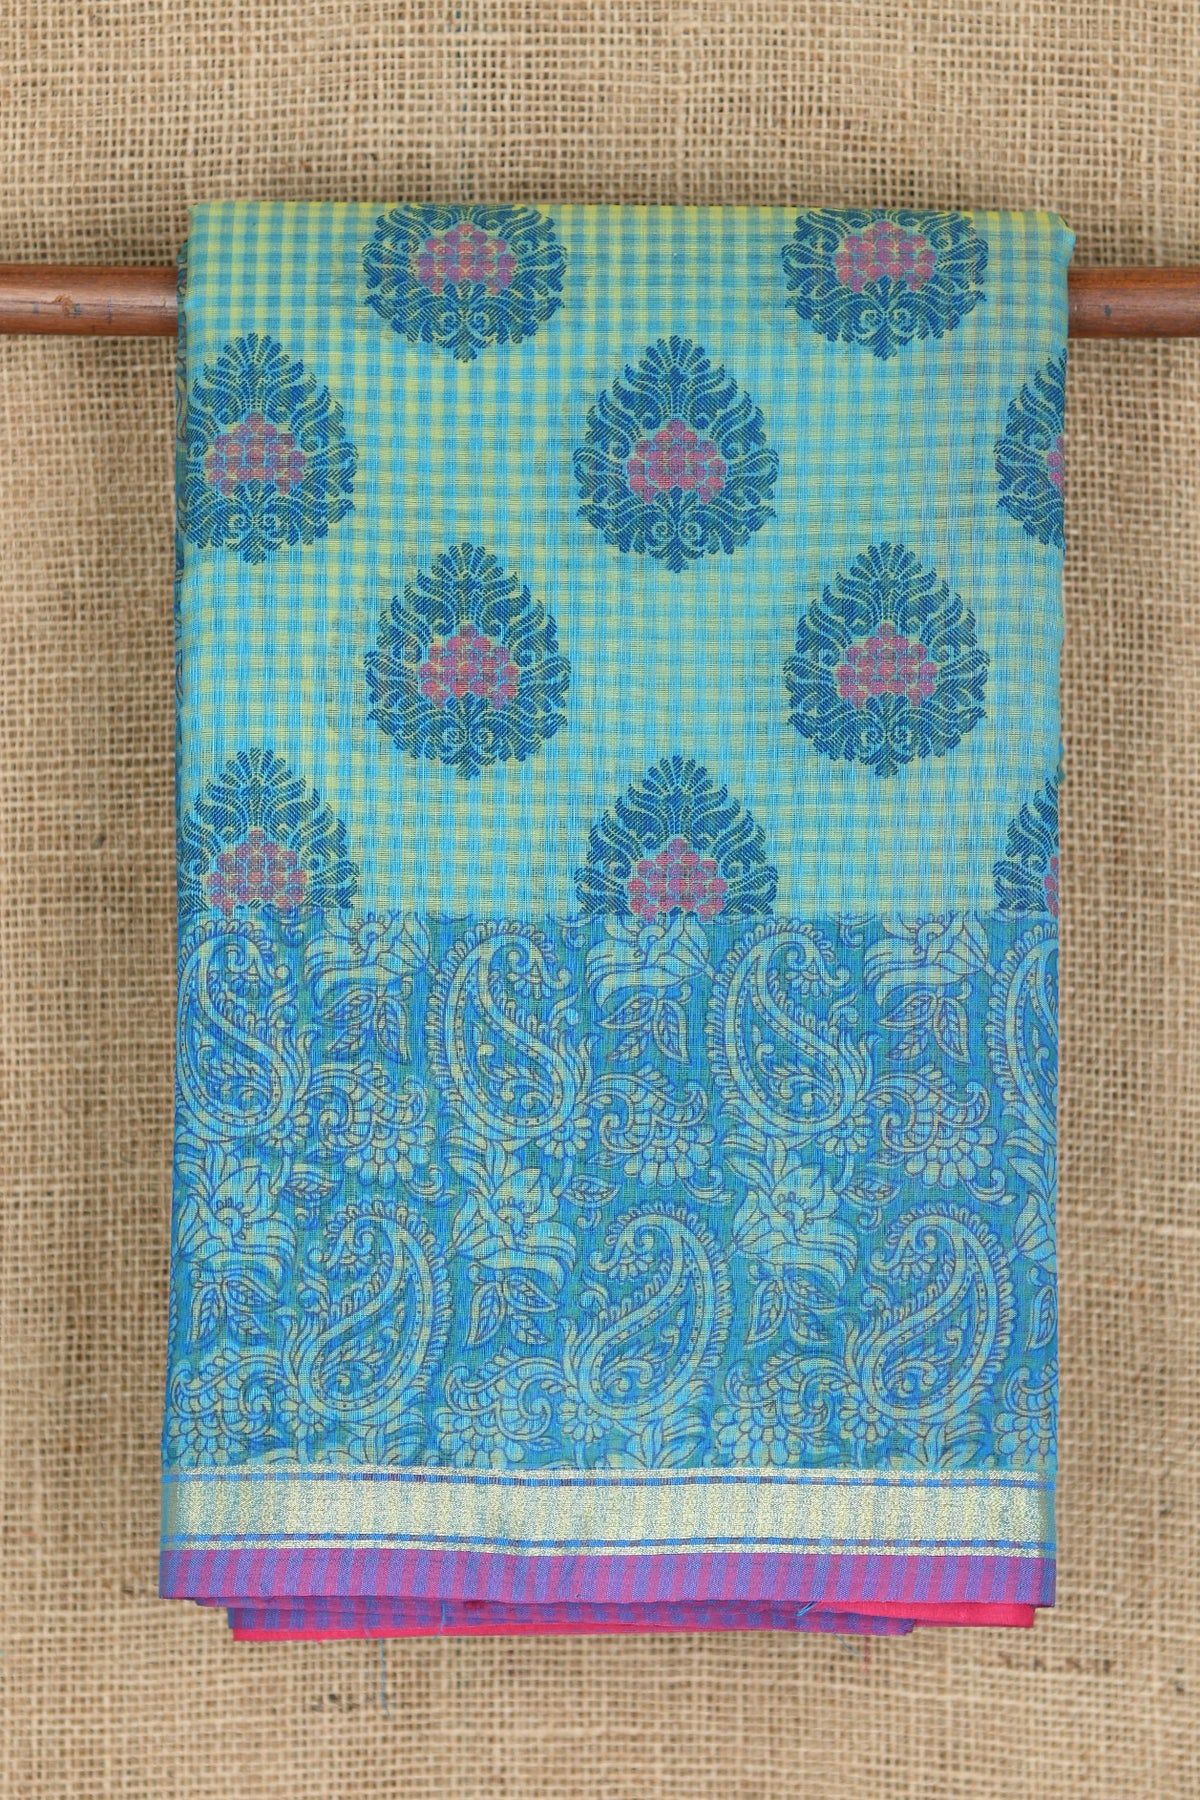 Small Border With Paisley And Floral Design Green And Blue Kota Cotton Saree